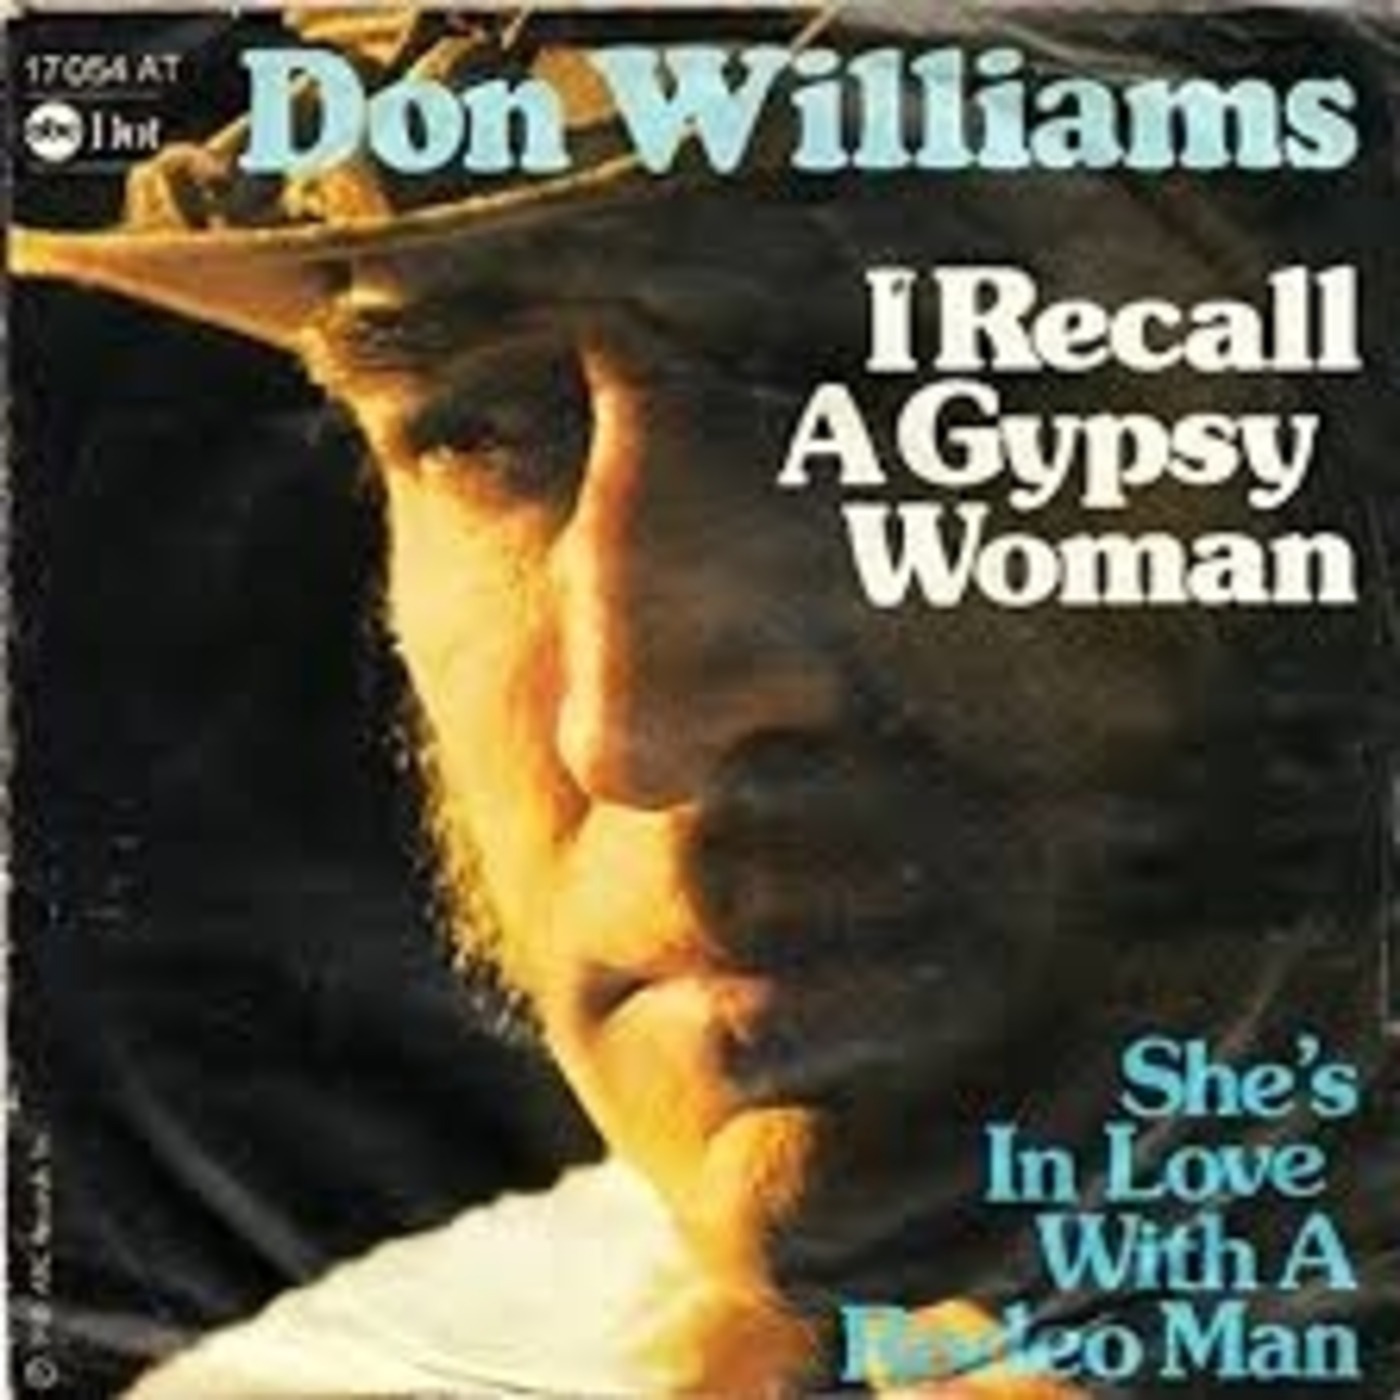 I Recall A Gypsy Woman by Tommy Cash, Don Williams and B.J. Thomas